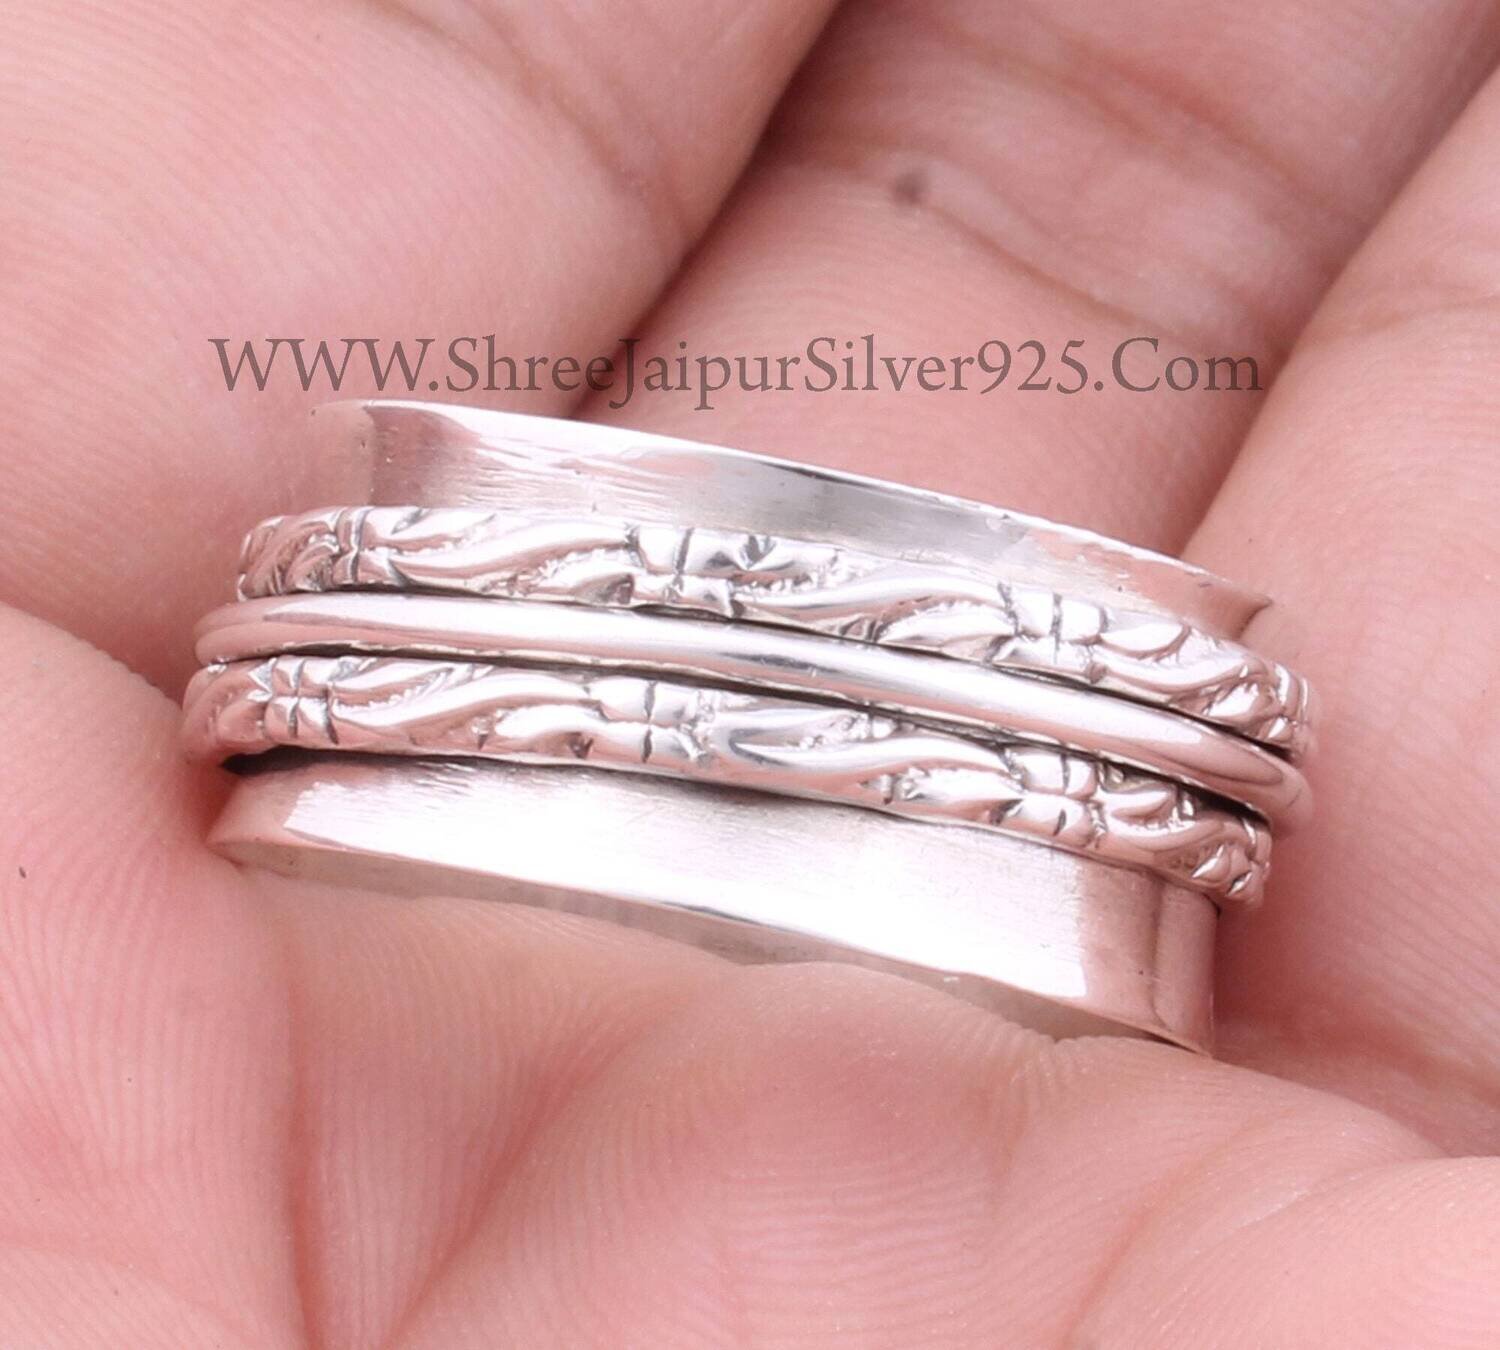 Big Size ETSY Boho 925 Sterling Silver Spinner Ring, Designer Hand Carver Spin Ring, Thumb Ring, Meditation Ring, Women Silver Jewelry,